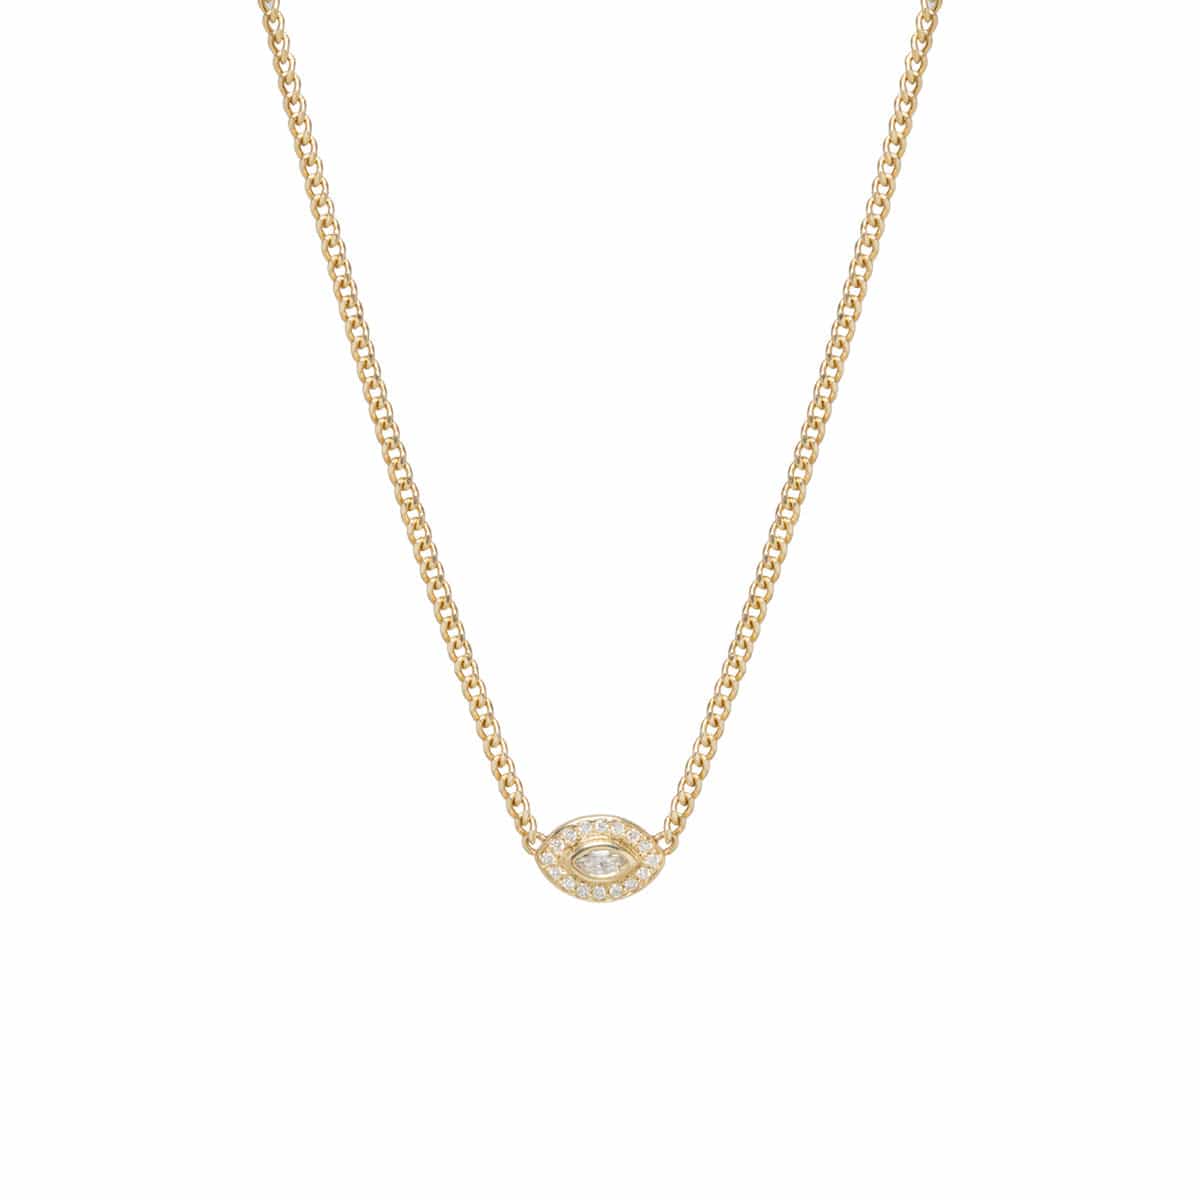 NKL-14K Marquise Diamond Halo Necklace